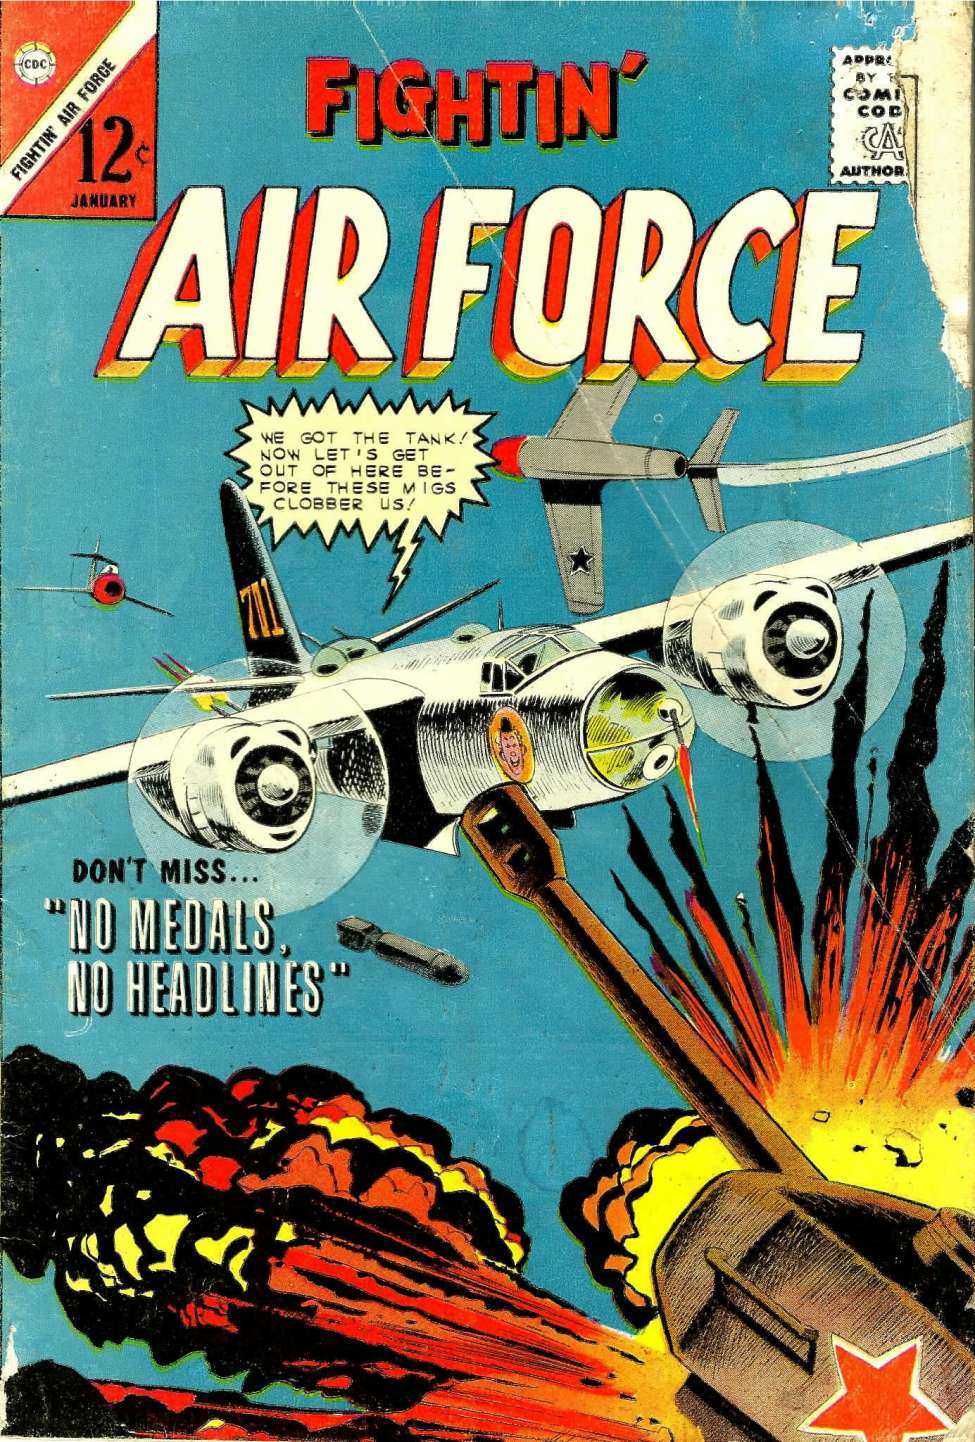 Book Cover For Fightin' Air Force 42